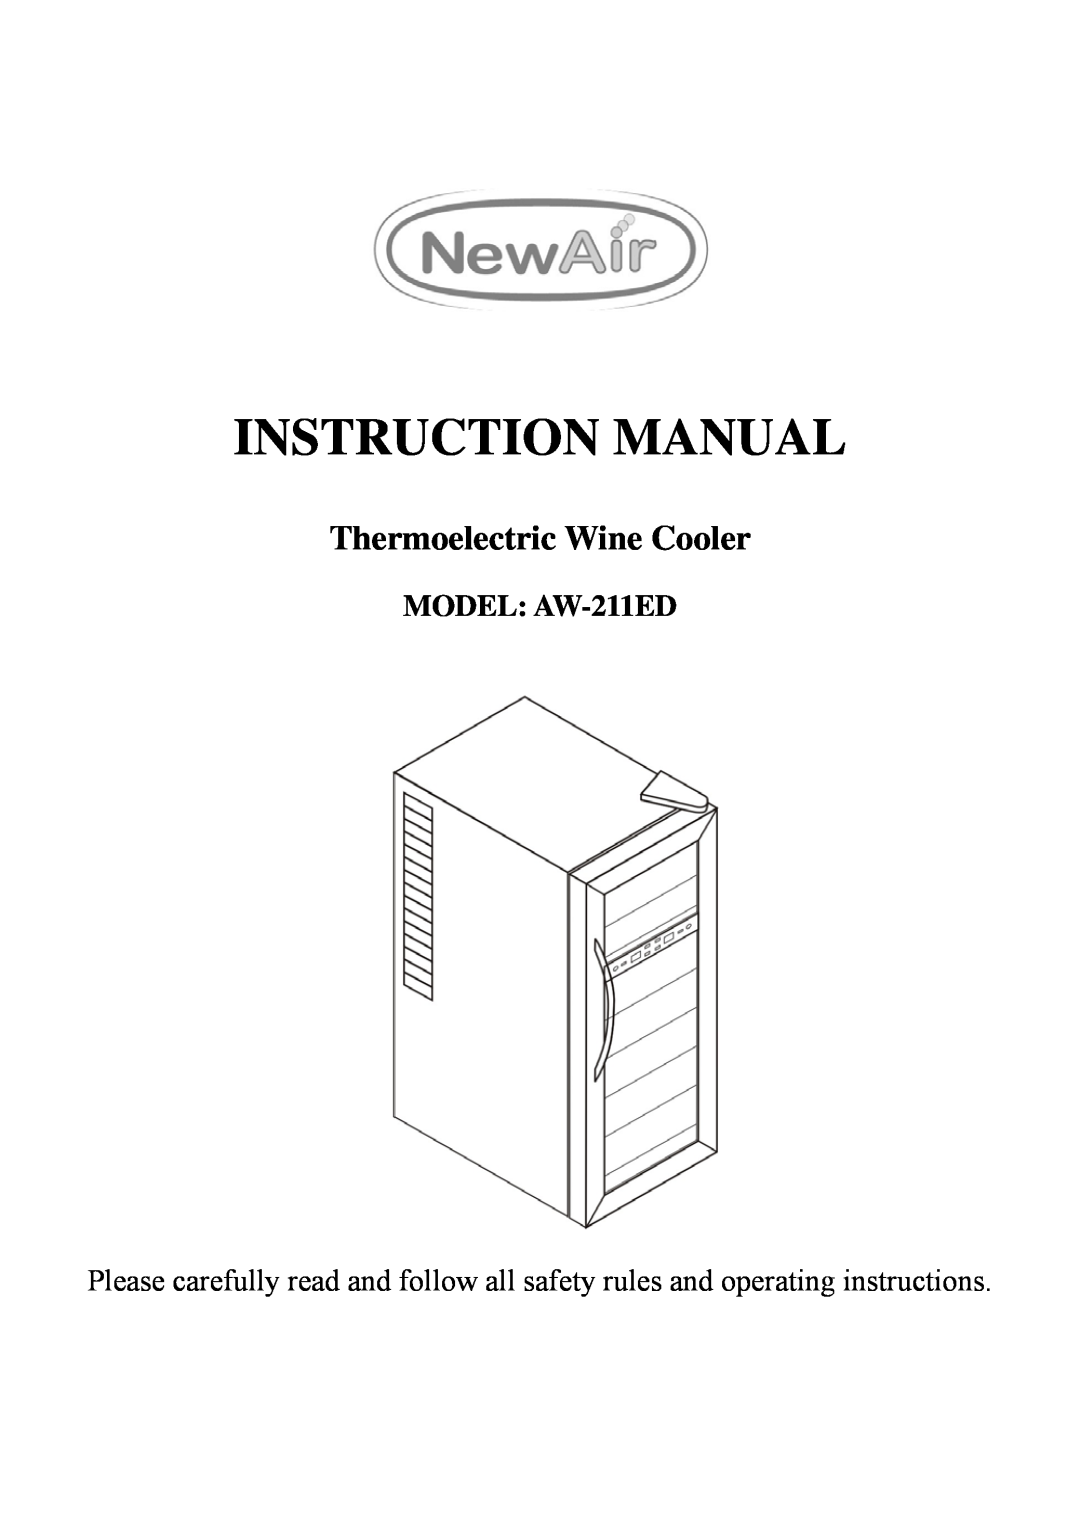 NewAir instruction manual MODEL AW-211ED, Thermoelectric Wine Cooler 